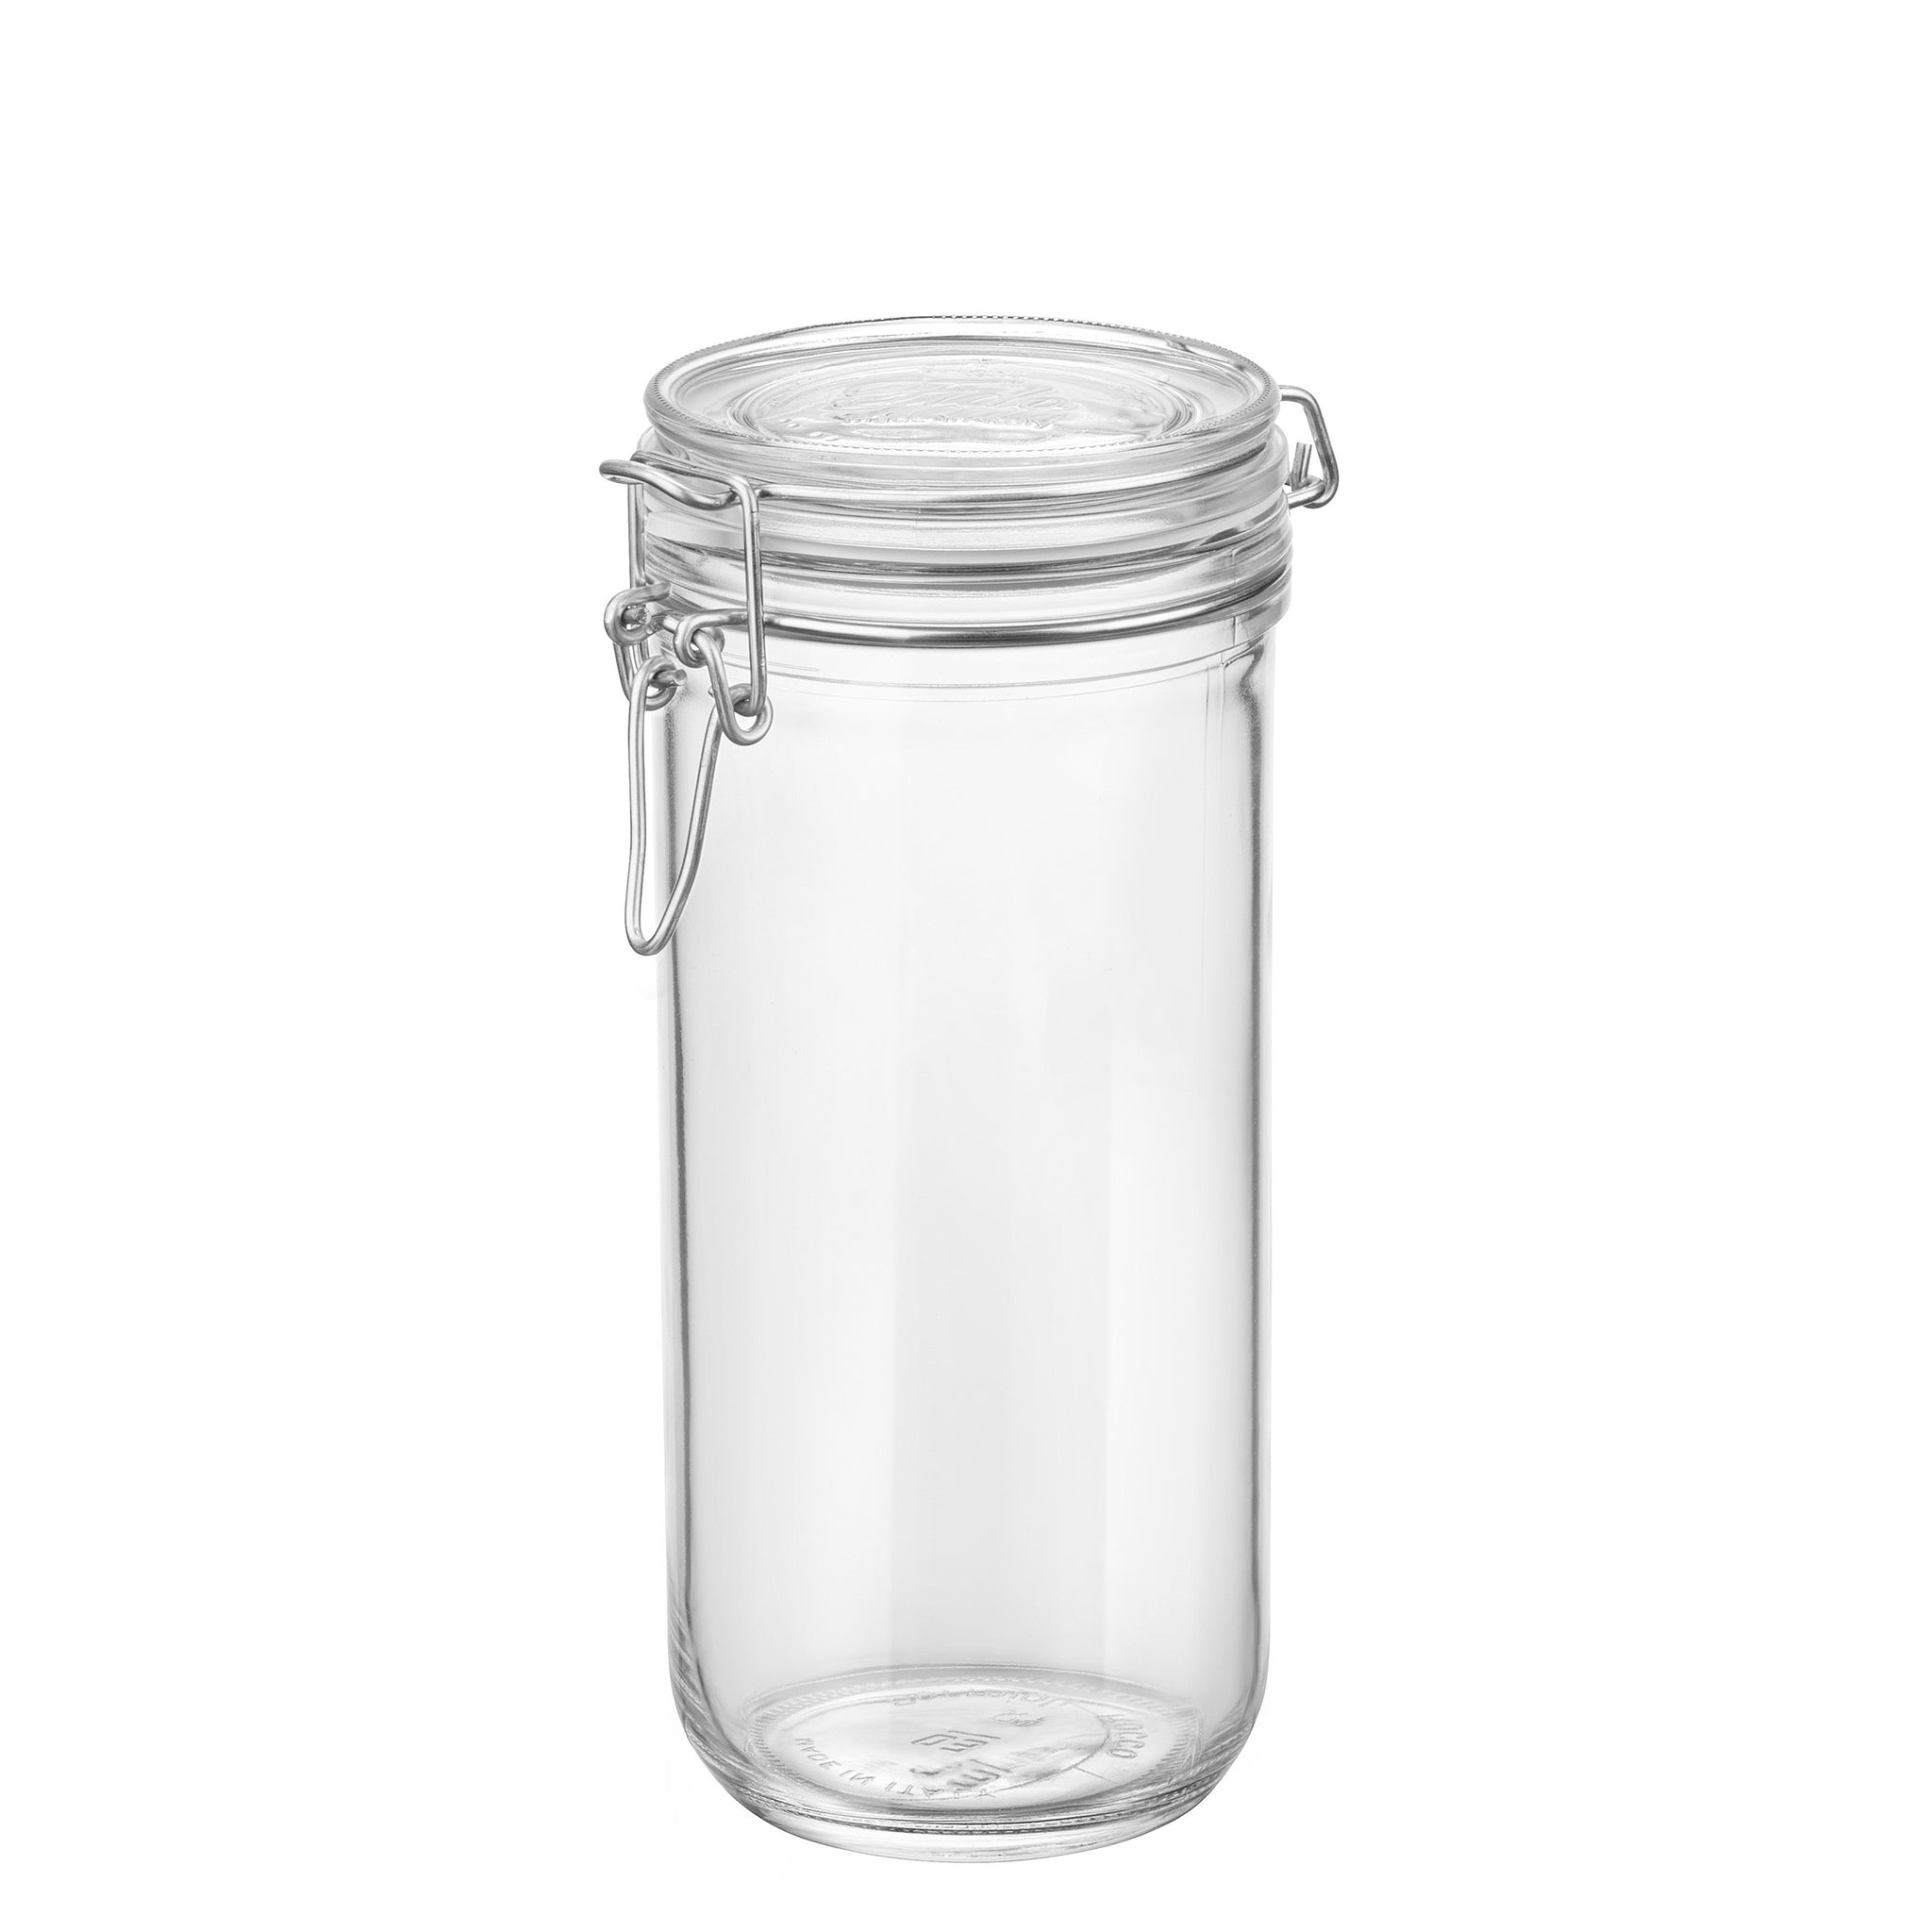 Bormioli Rocco Glass Fido Jars - 135.75 Oz (4 Liter) Airtight lid for  Fermenting, Preserving, with Chalkboard Labels - 2 Pack - Bed Bath & Beyond  - 29043351